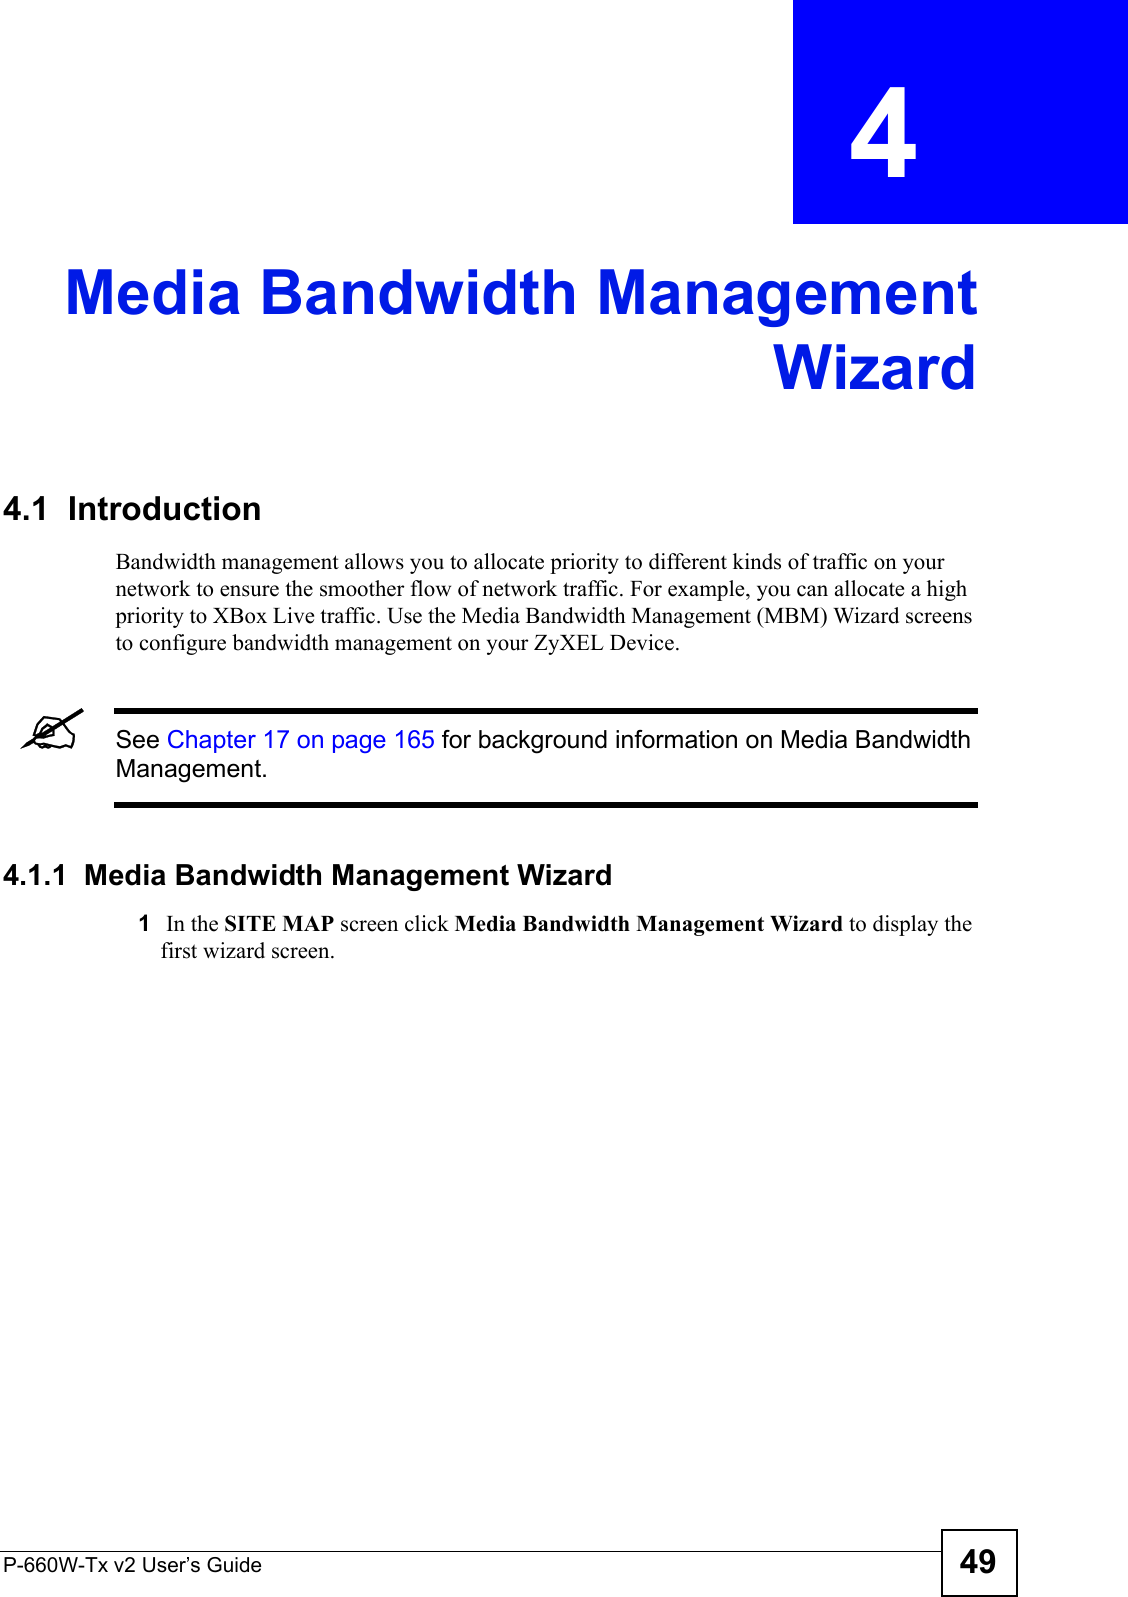 P-660W-Tx v2 User’s Guide 49CHAPTER  4 Media Bandwidth ManagementWizard4.1  IntroductionBandwidth management allows you to allocate priority to different kinds of traffic on your network to ensure the smoother flow of network traffic. For example, you can allocate a high priority to XBox Live traffic. Use the Media Bandwidth Management (MBM) Wizard screens to configure bandwidth management on your ZyXEL Device.  &quot;See Chapter 17 on page 165 for background information on Media Bandwidth Management.4.1.1  Media Bandwidth Management Wizard1 In the SITE MAP screen click Media Bandwidth Management Wizard to display the first wizard screen. 